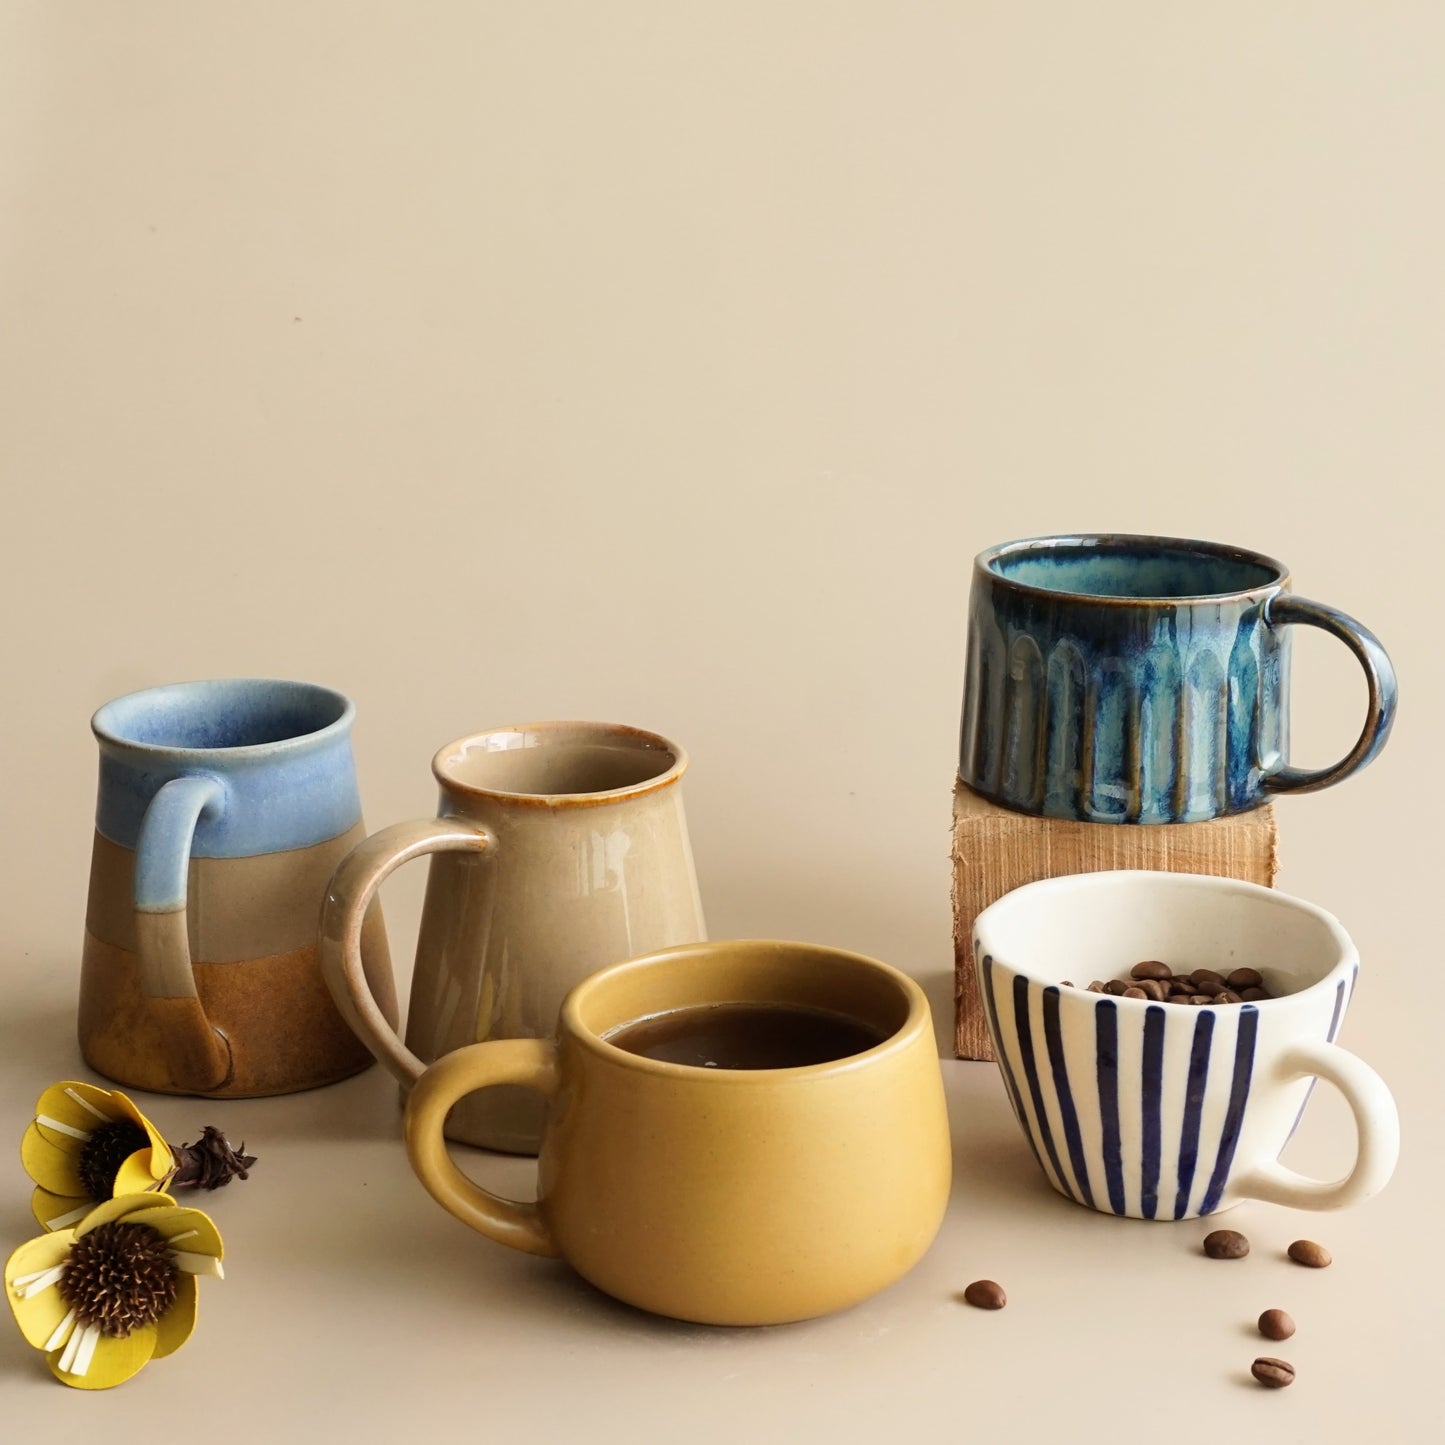 Most-Sold Set of 5 Mugs | Limited Stock